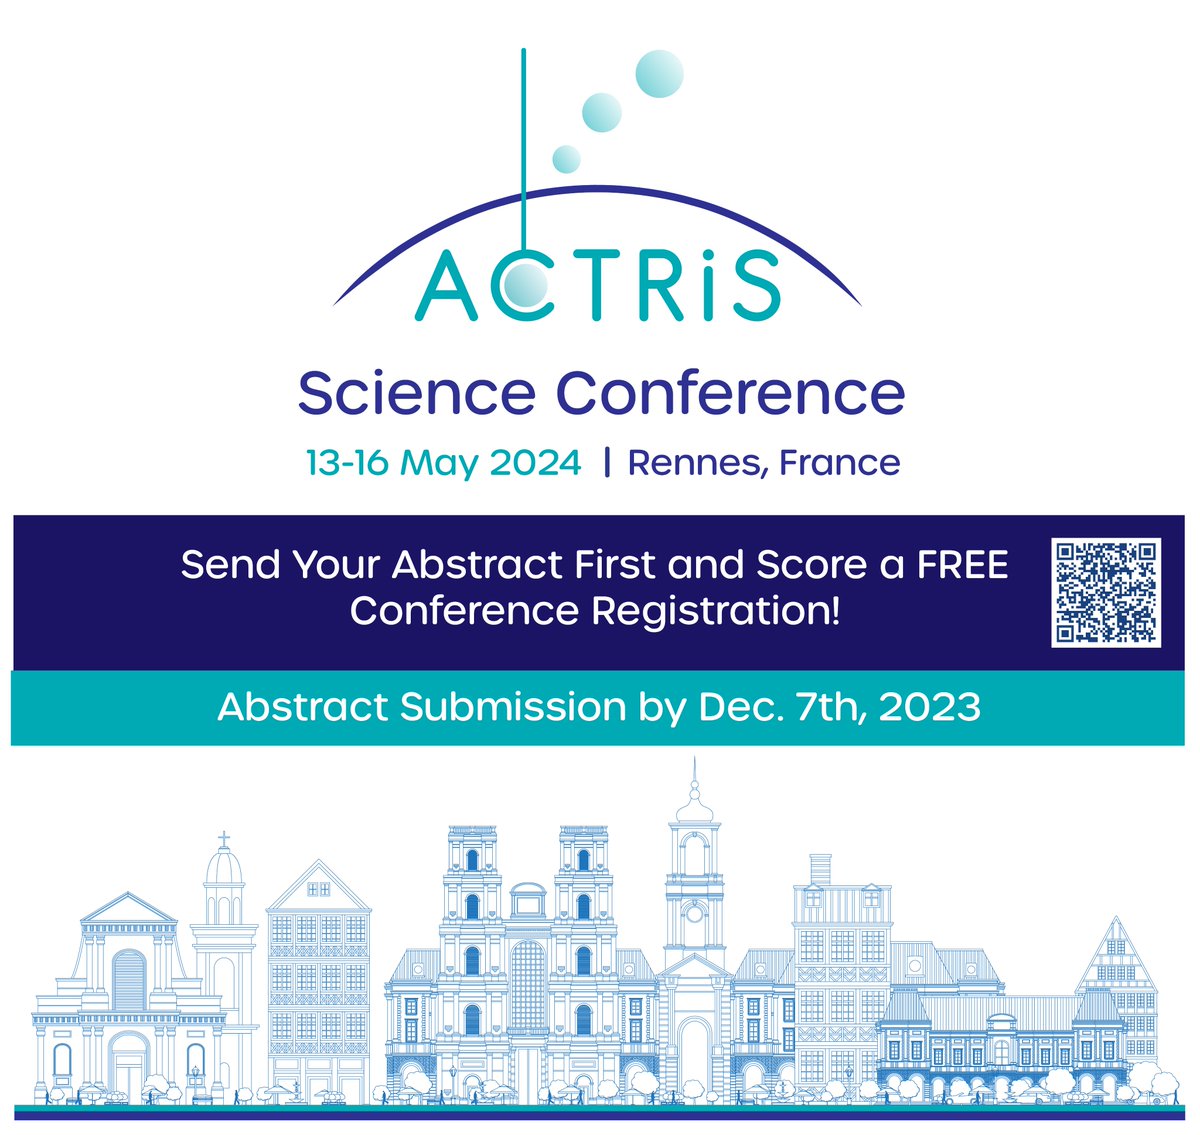 📢 #ACTRIS Science Conference 2024 Call for abstract submission! 🔭 🏆 First abstracts = Free registration! 📅Submission deadline: 7.12.2023 📍 Rennes, France 🇫🇷 🔗Learn more: actris.eu/news-events/ev…